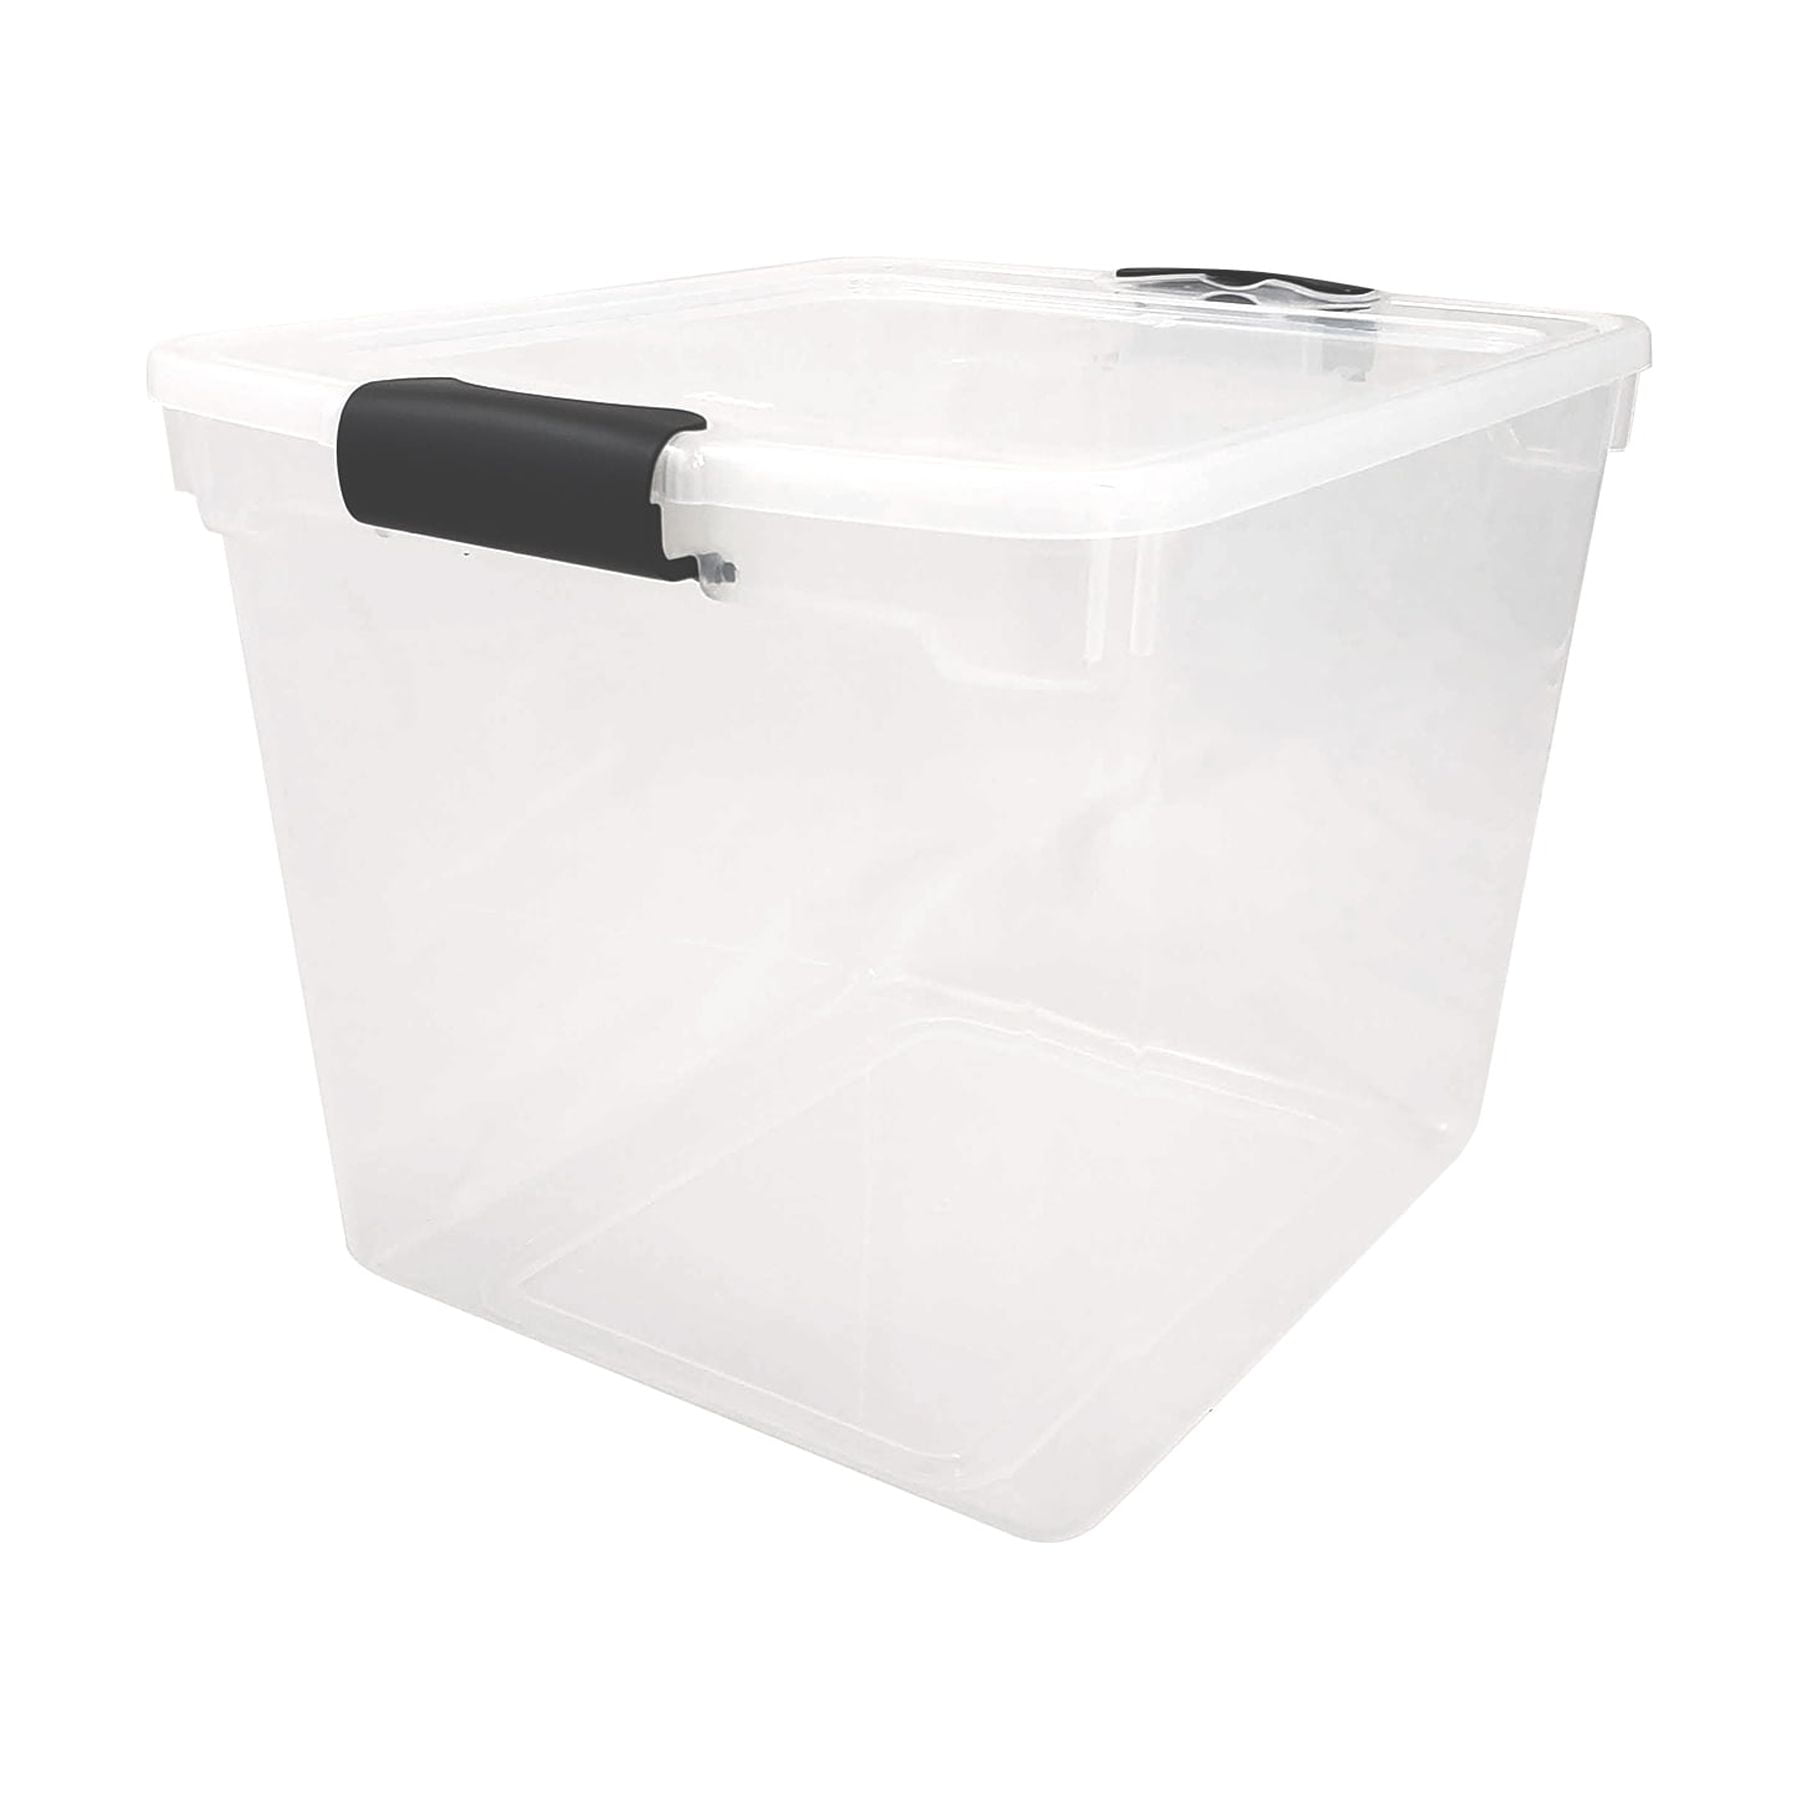 Stack and Carry 2 Layer Handle Box Clear With Blue Handle Storage Holder  Bin 